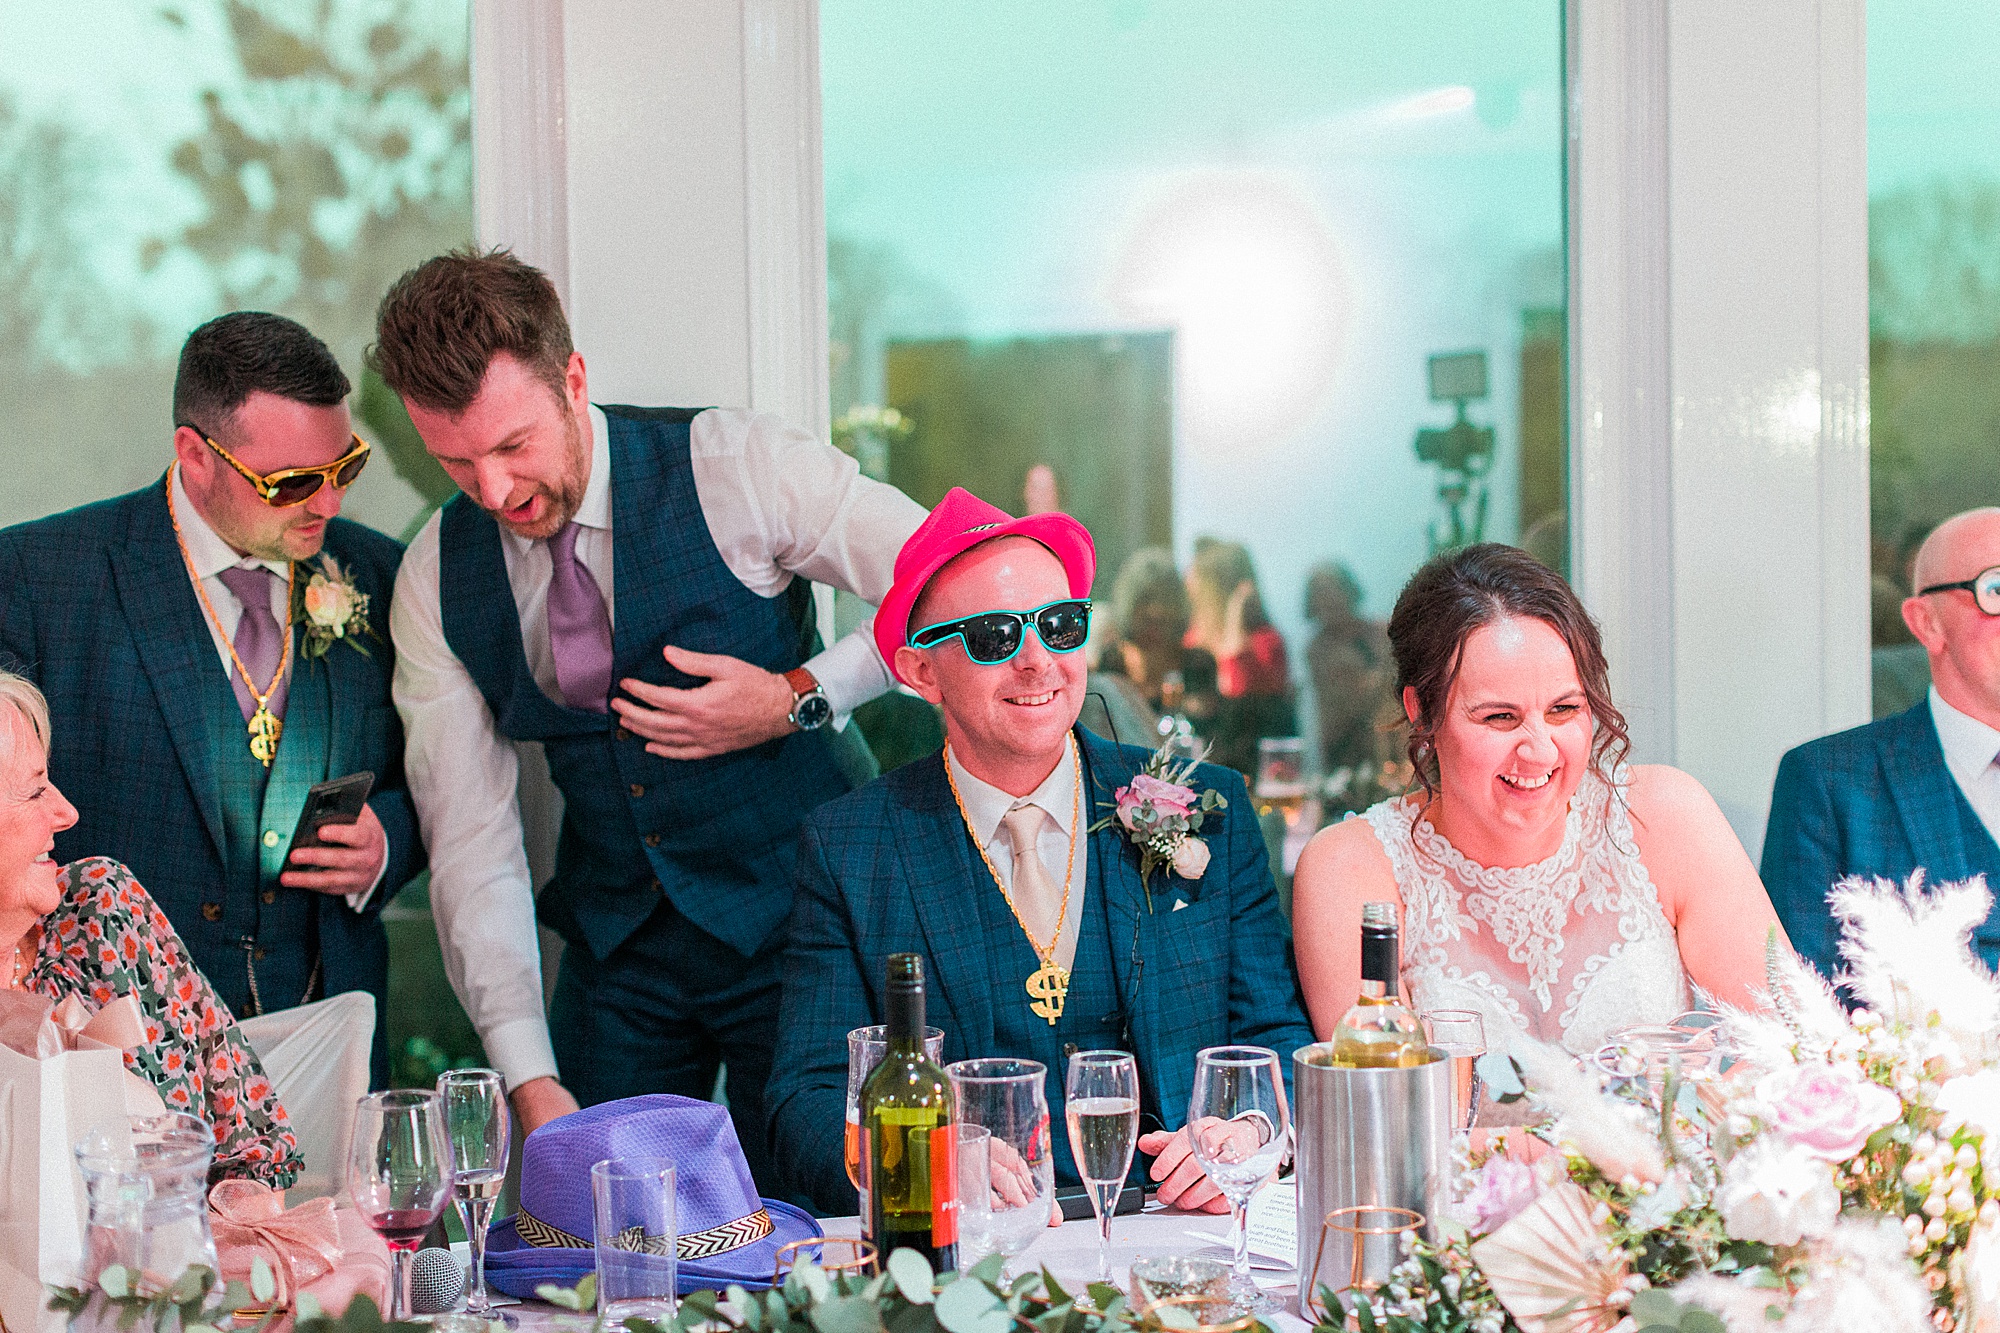 photo of gents including the groom and his two best men at a wedding wearing light up props and accessories during the speeches 